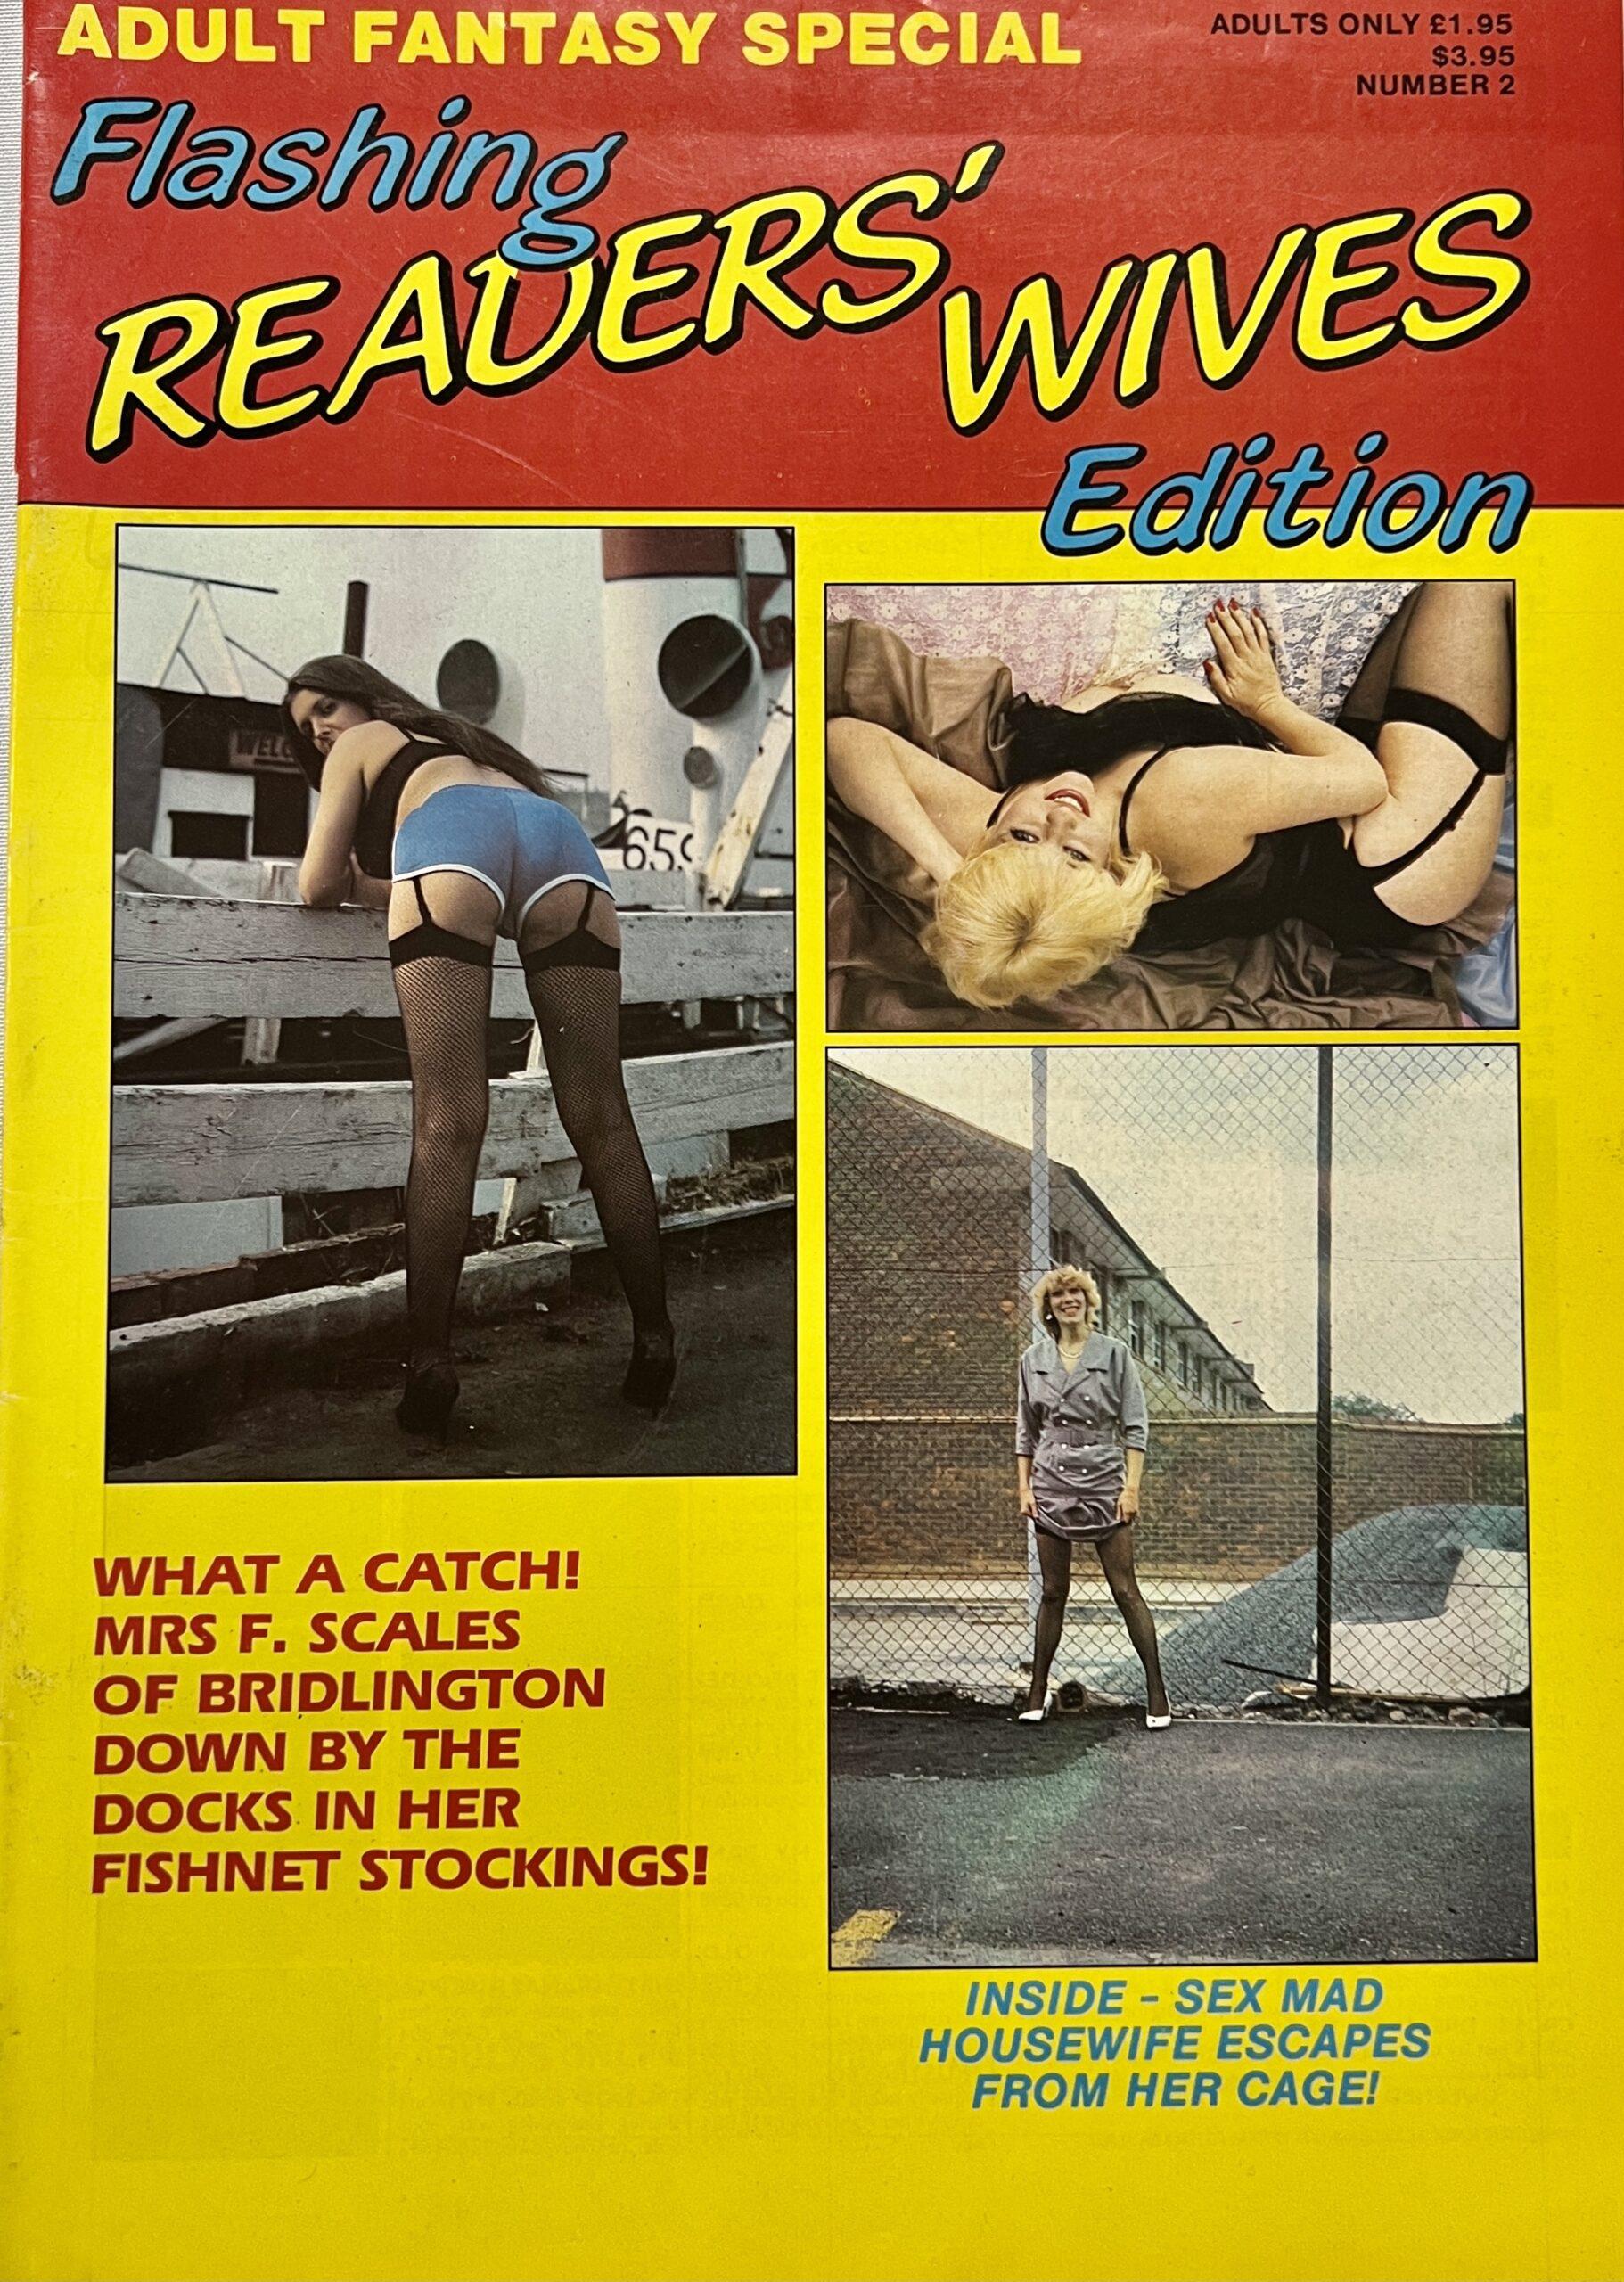 Flashing Readers Wives Edition Adult Fantasy Special #2 80S UK Magazine photo